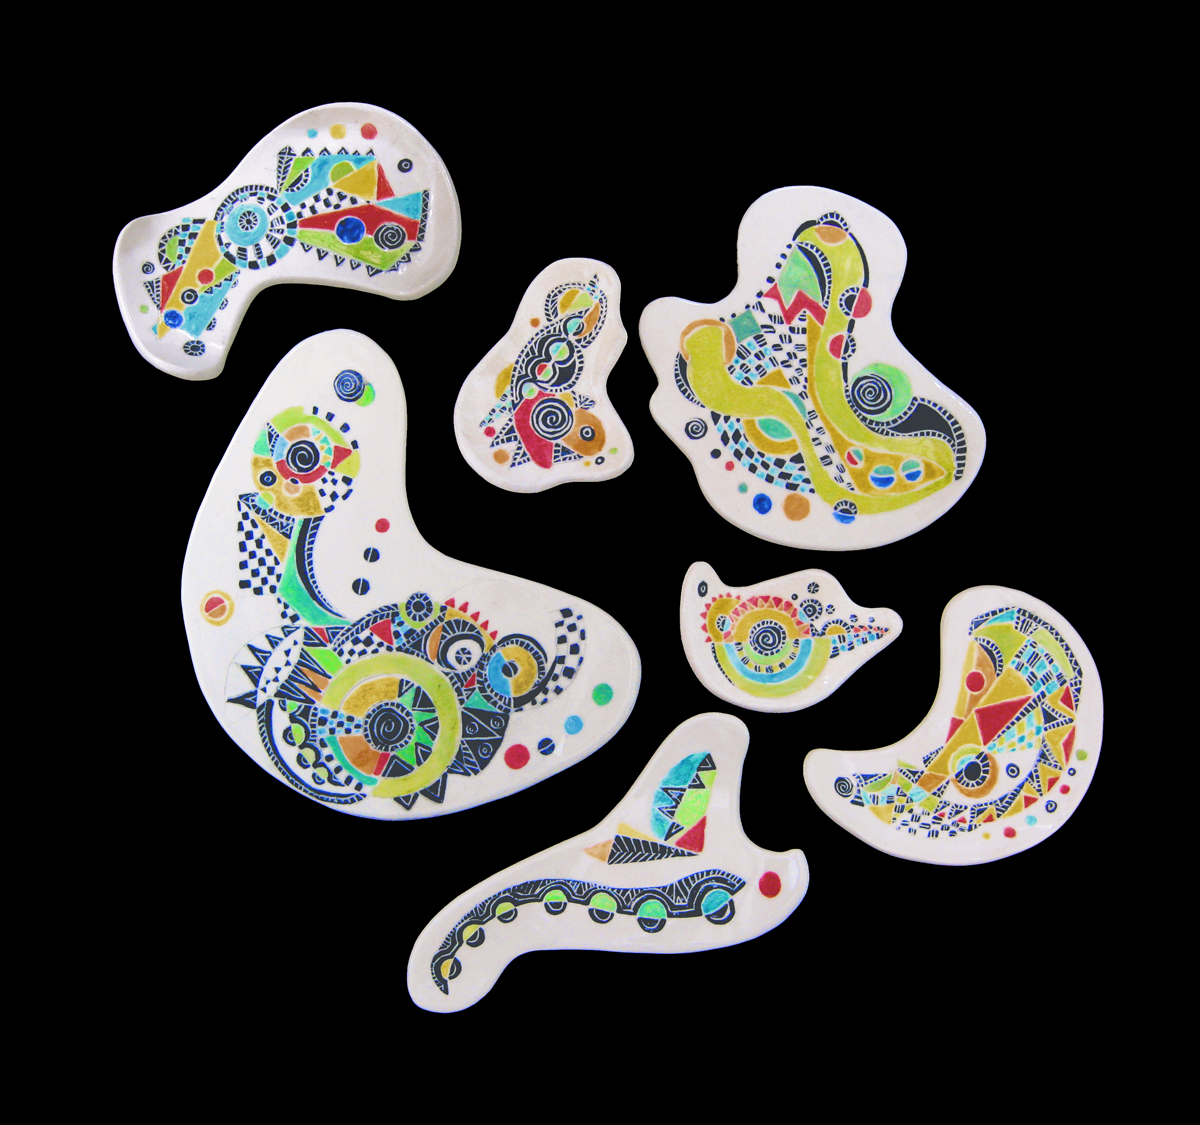 Ceramic shapes with colorful designs 